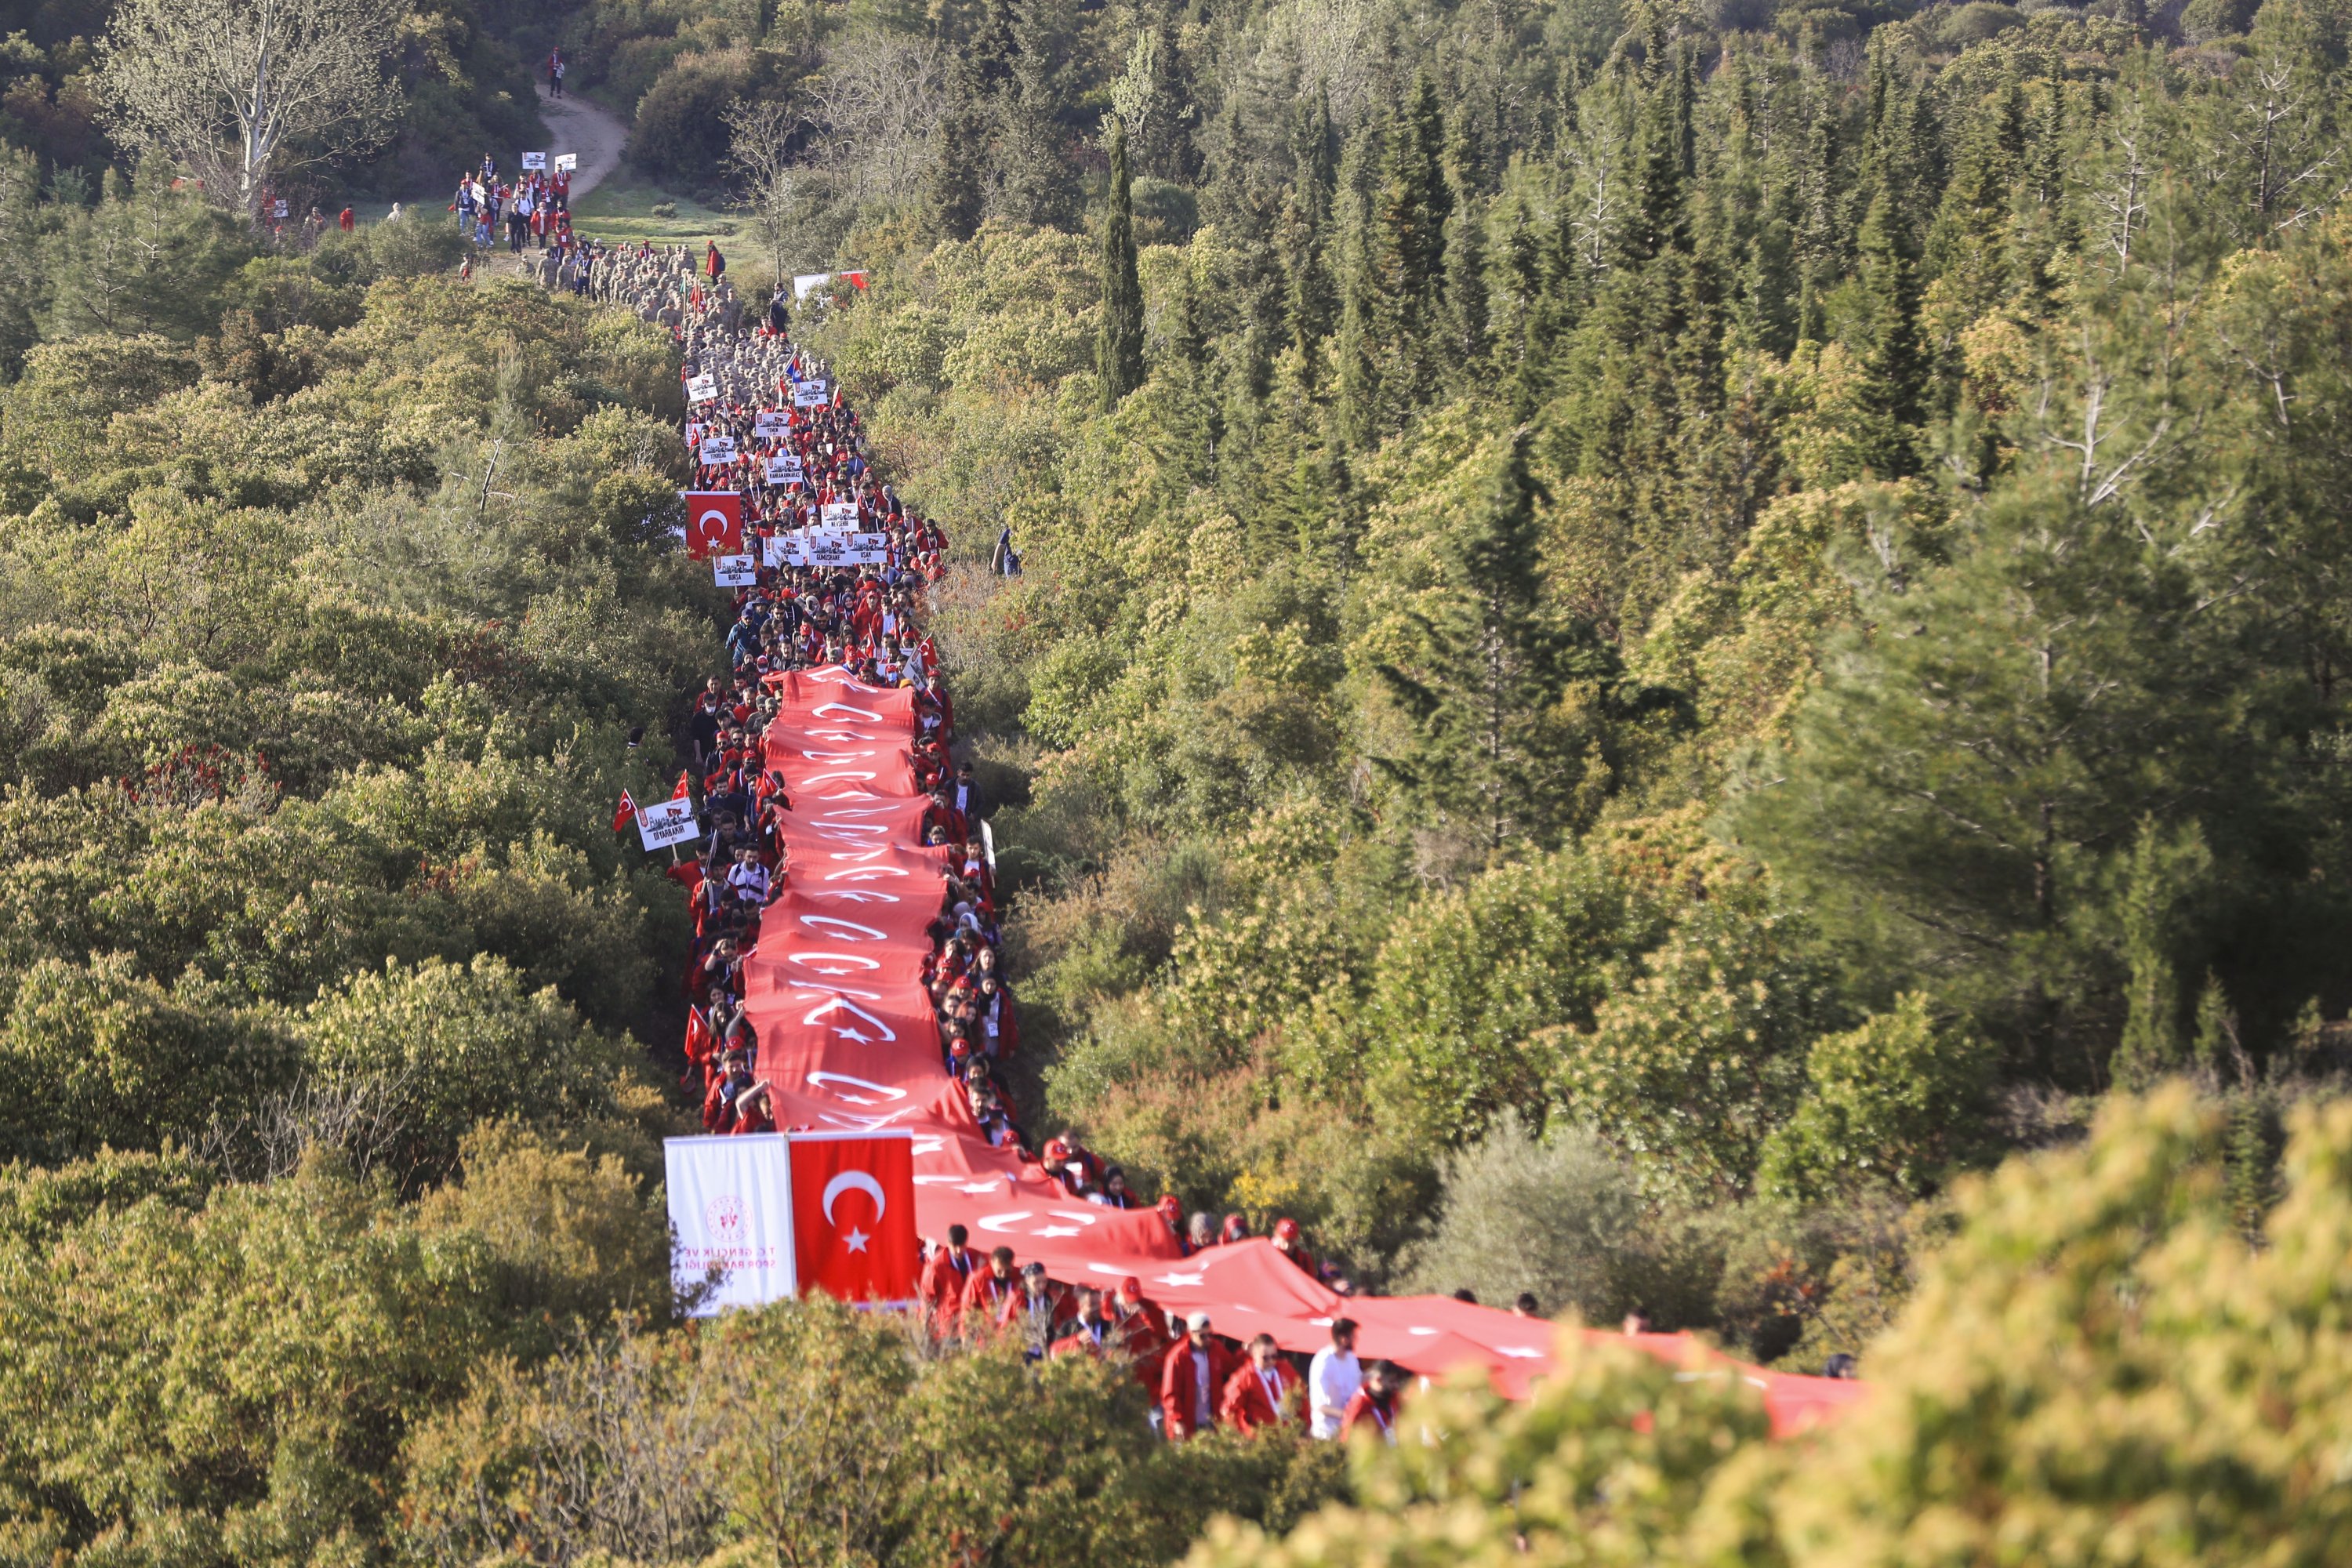 Participants carry a giant Turkish flag during a march to remember fallen troops, in Çanakkale, western Turkey, April 25, 2022. (AA Photo)